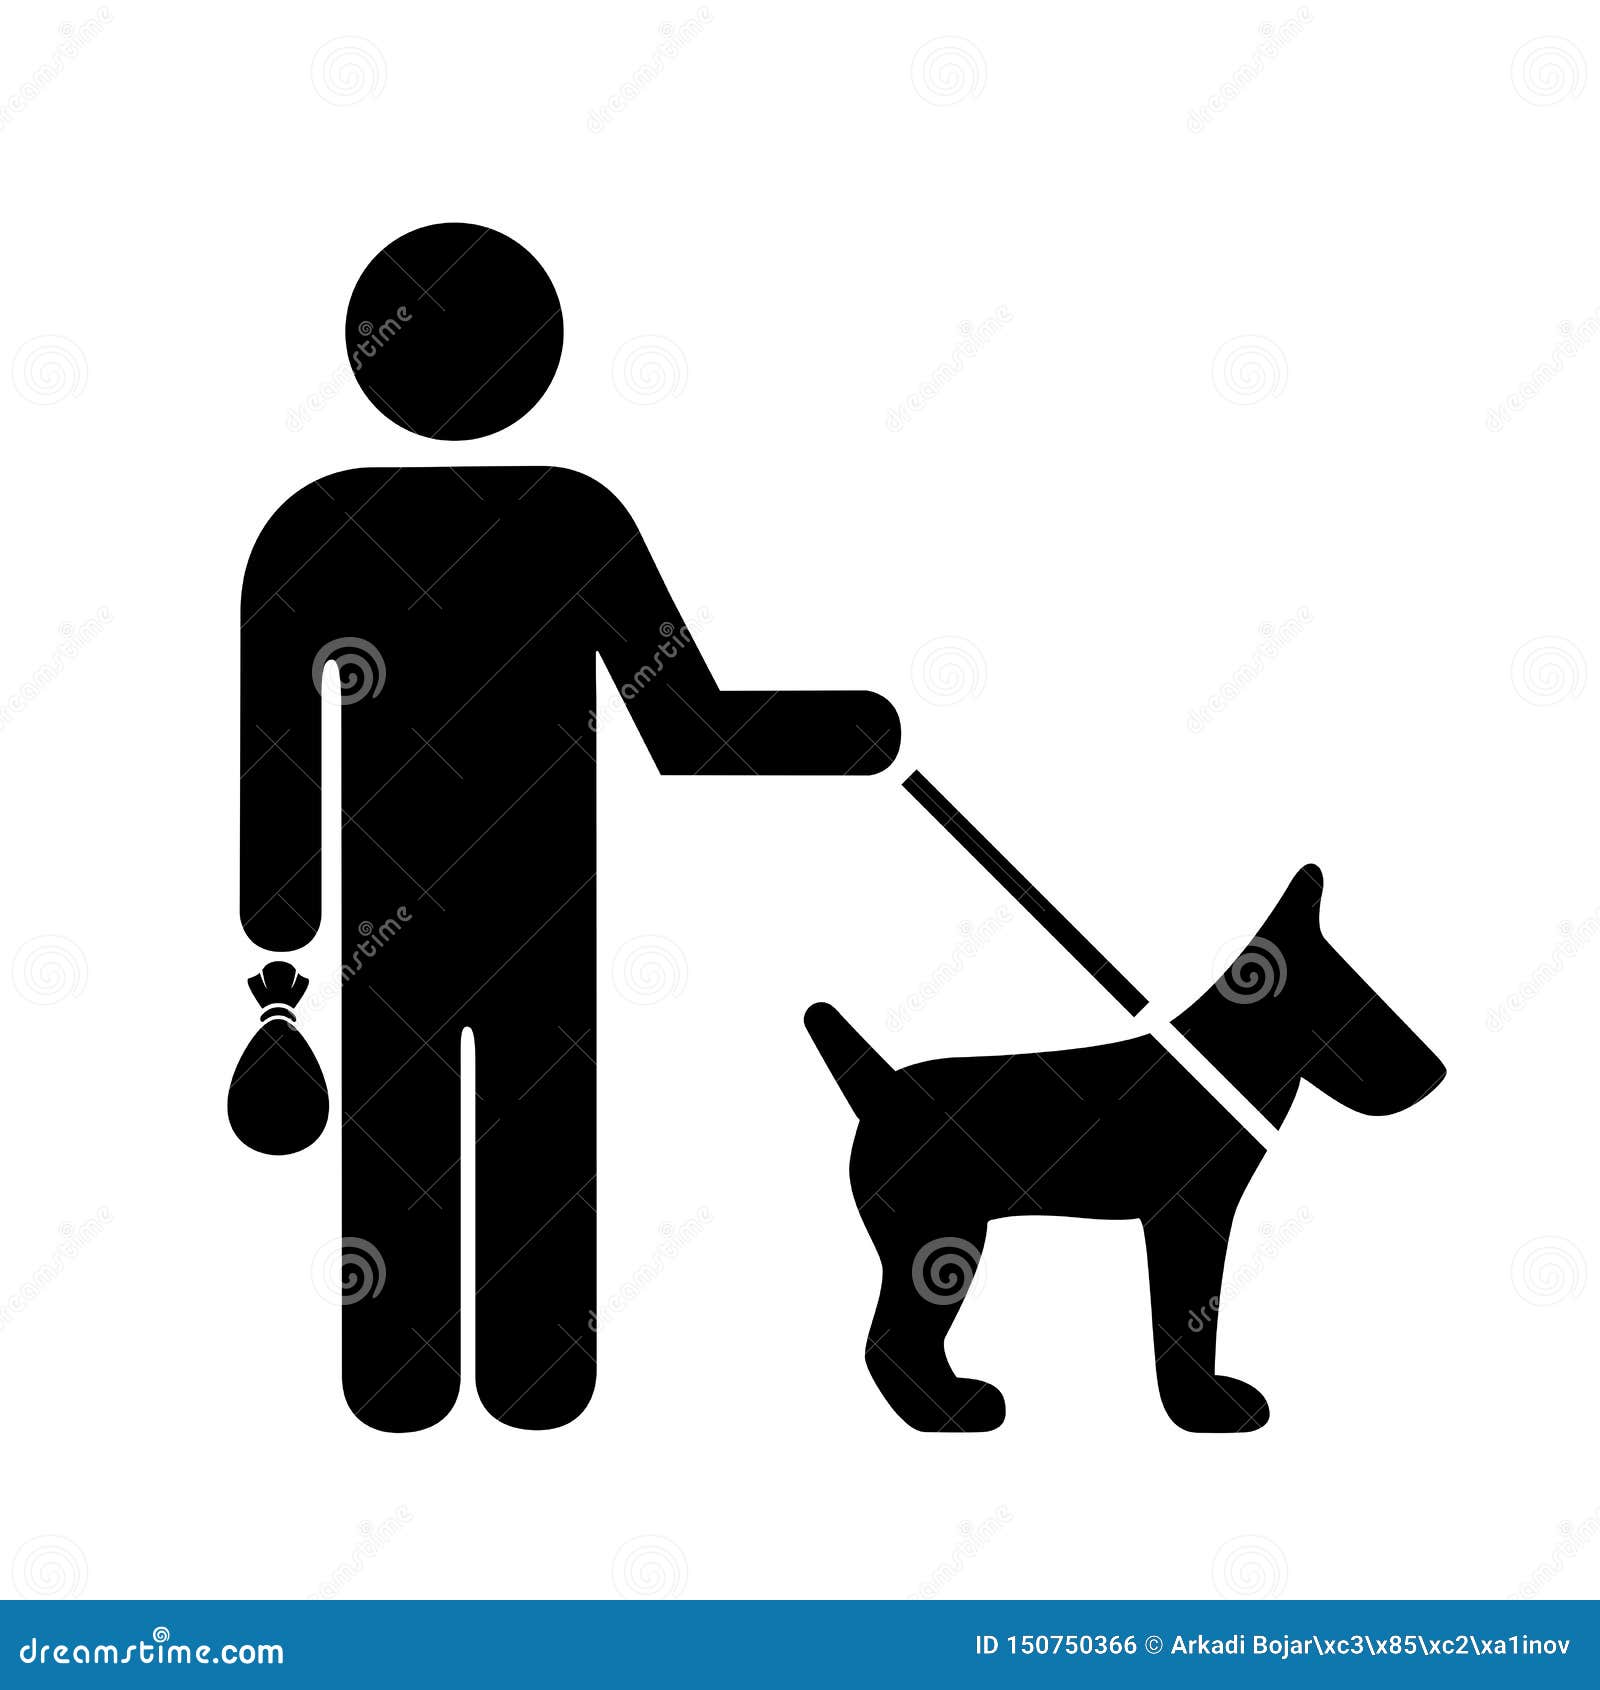 pick up after your dog sign